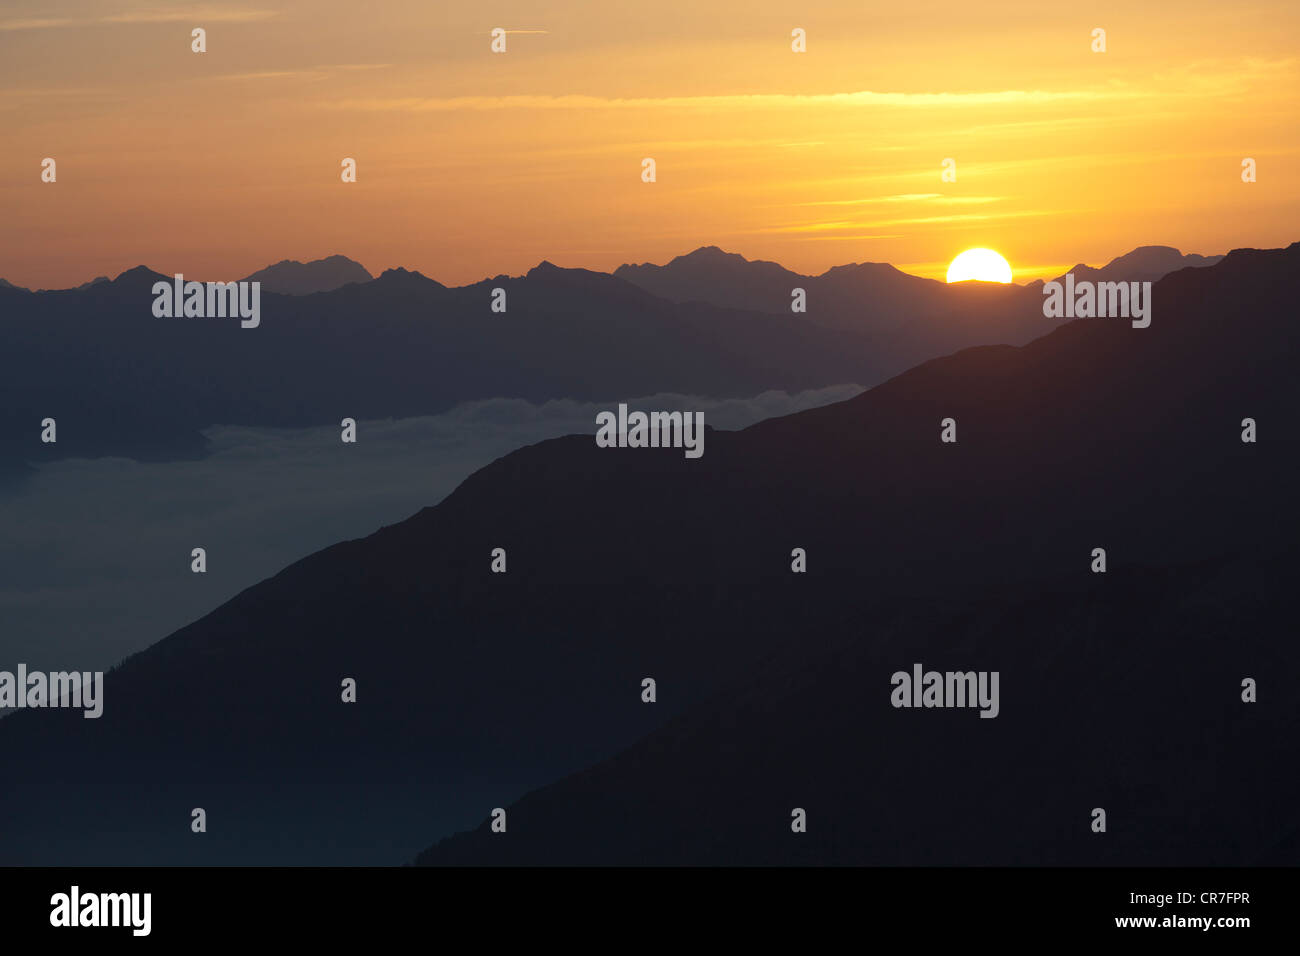 Sunrise over the Venosta Valley, South Tyrol, Italy. The view from the Stelvio Pass with the Dolomites on the horizon Stock Photo